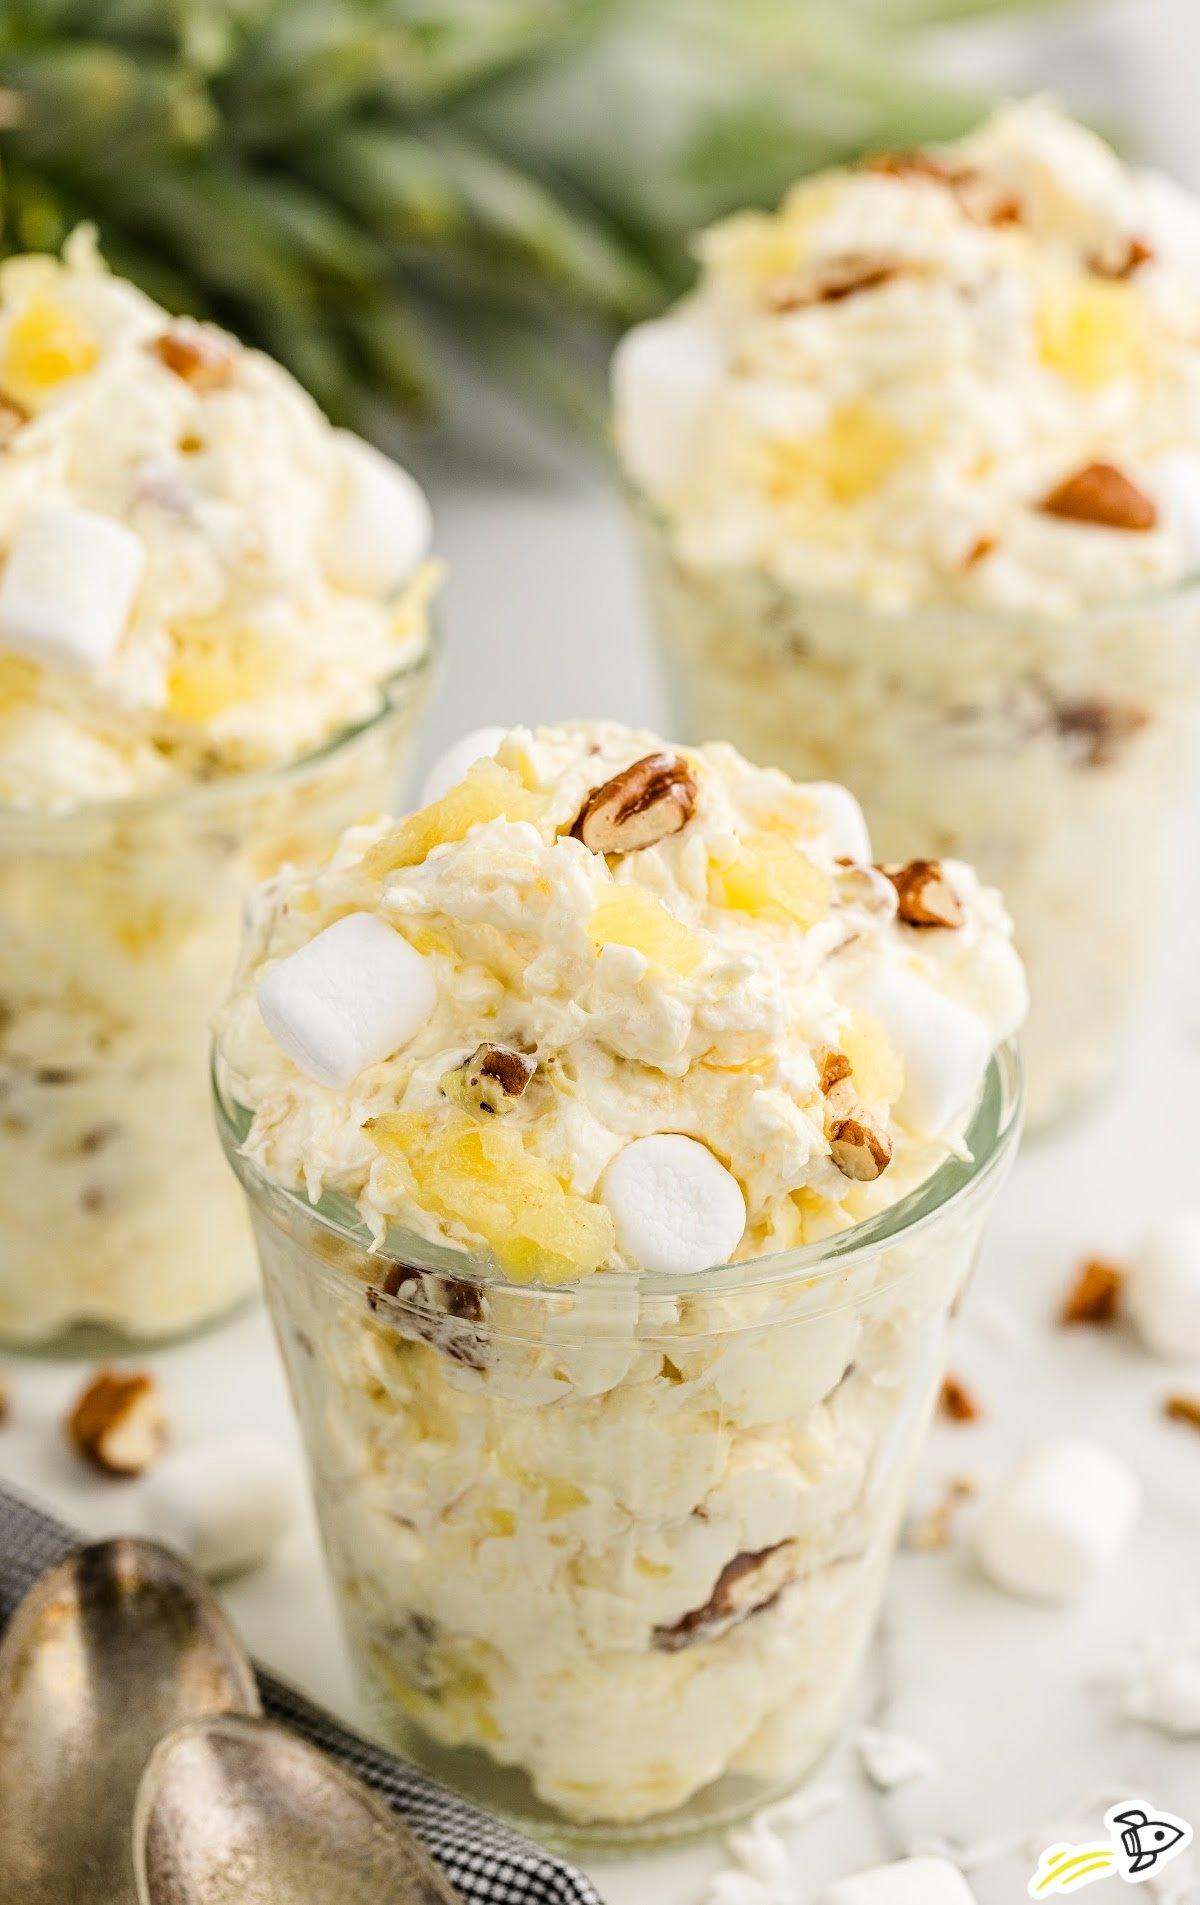 pineapple fluff with nuts, marshmallows, and pudding ready to eat